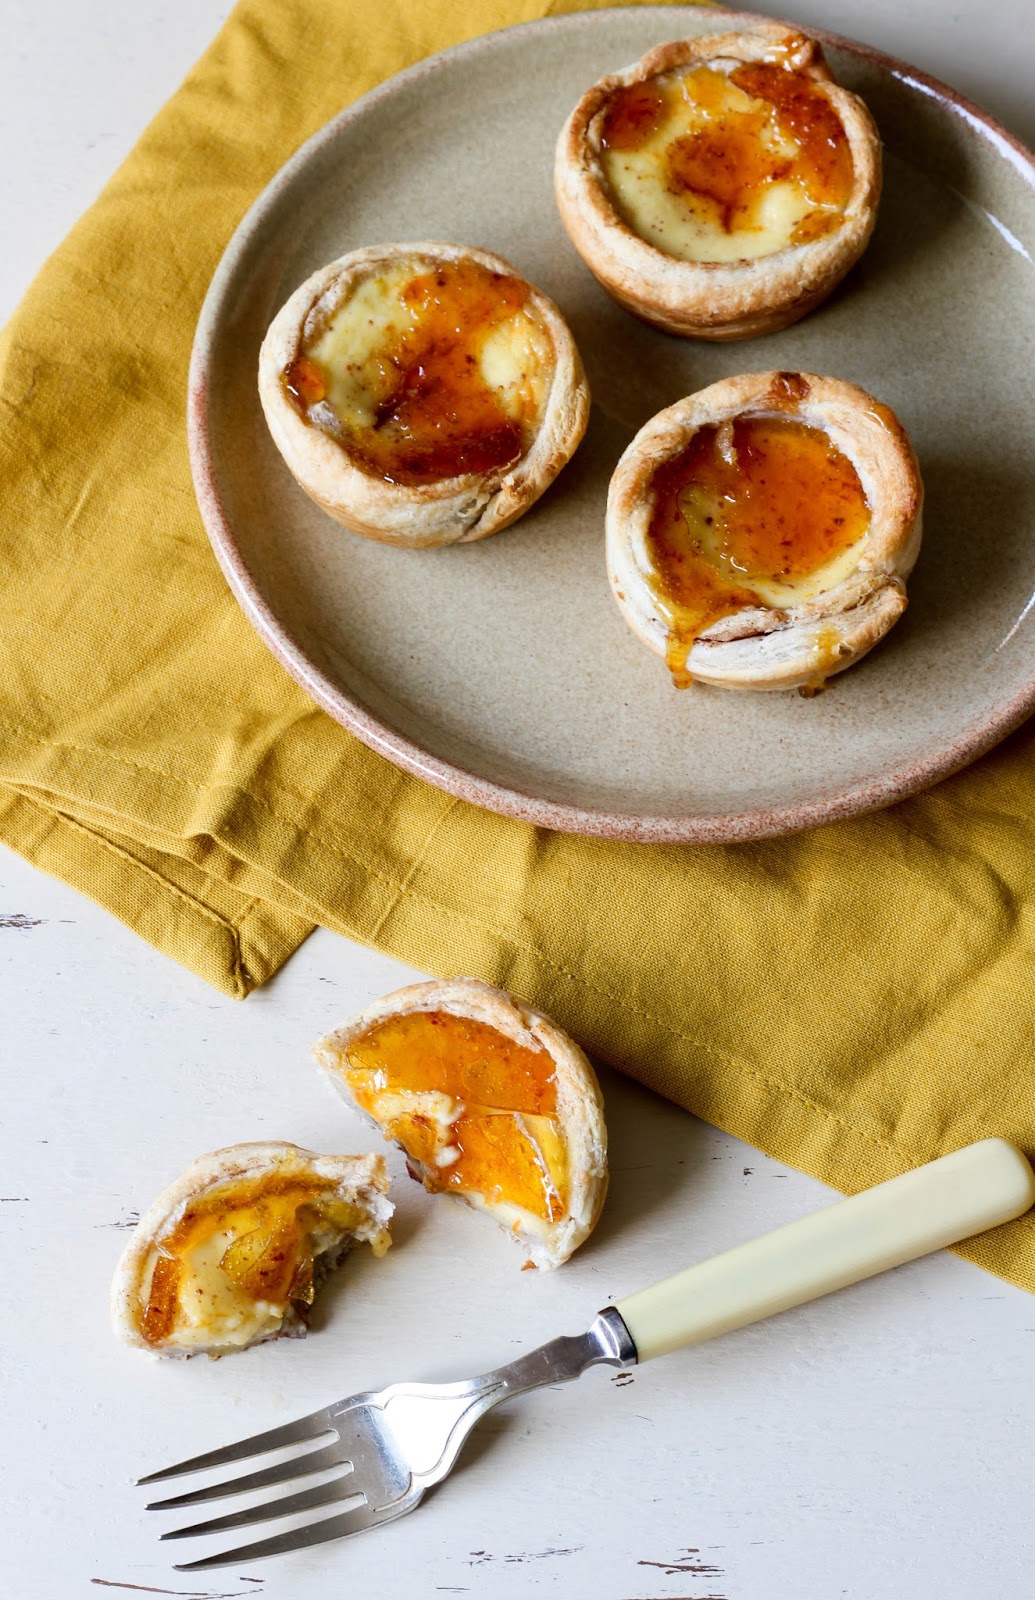 The Spoon and Whisk: Quick Orange Caramel and Cinnamon Portuguese Tarts